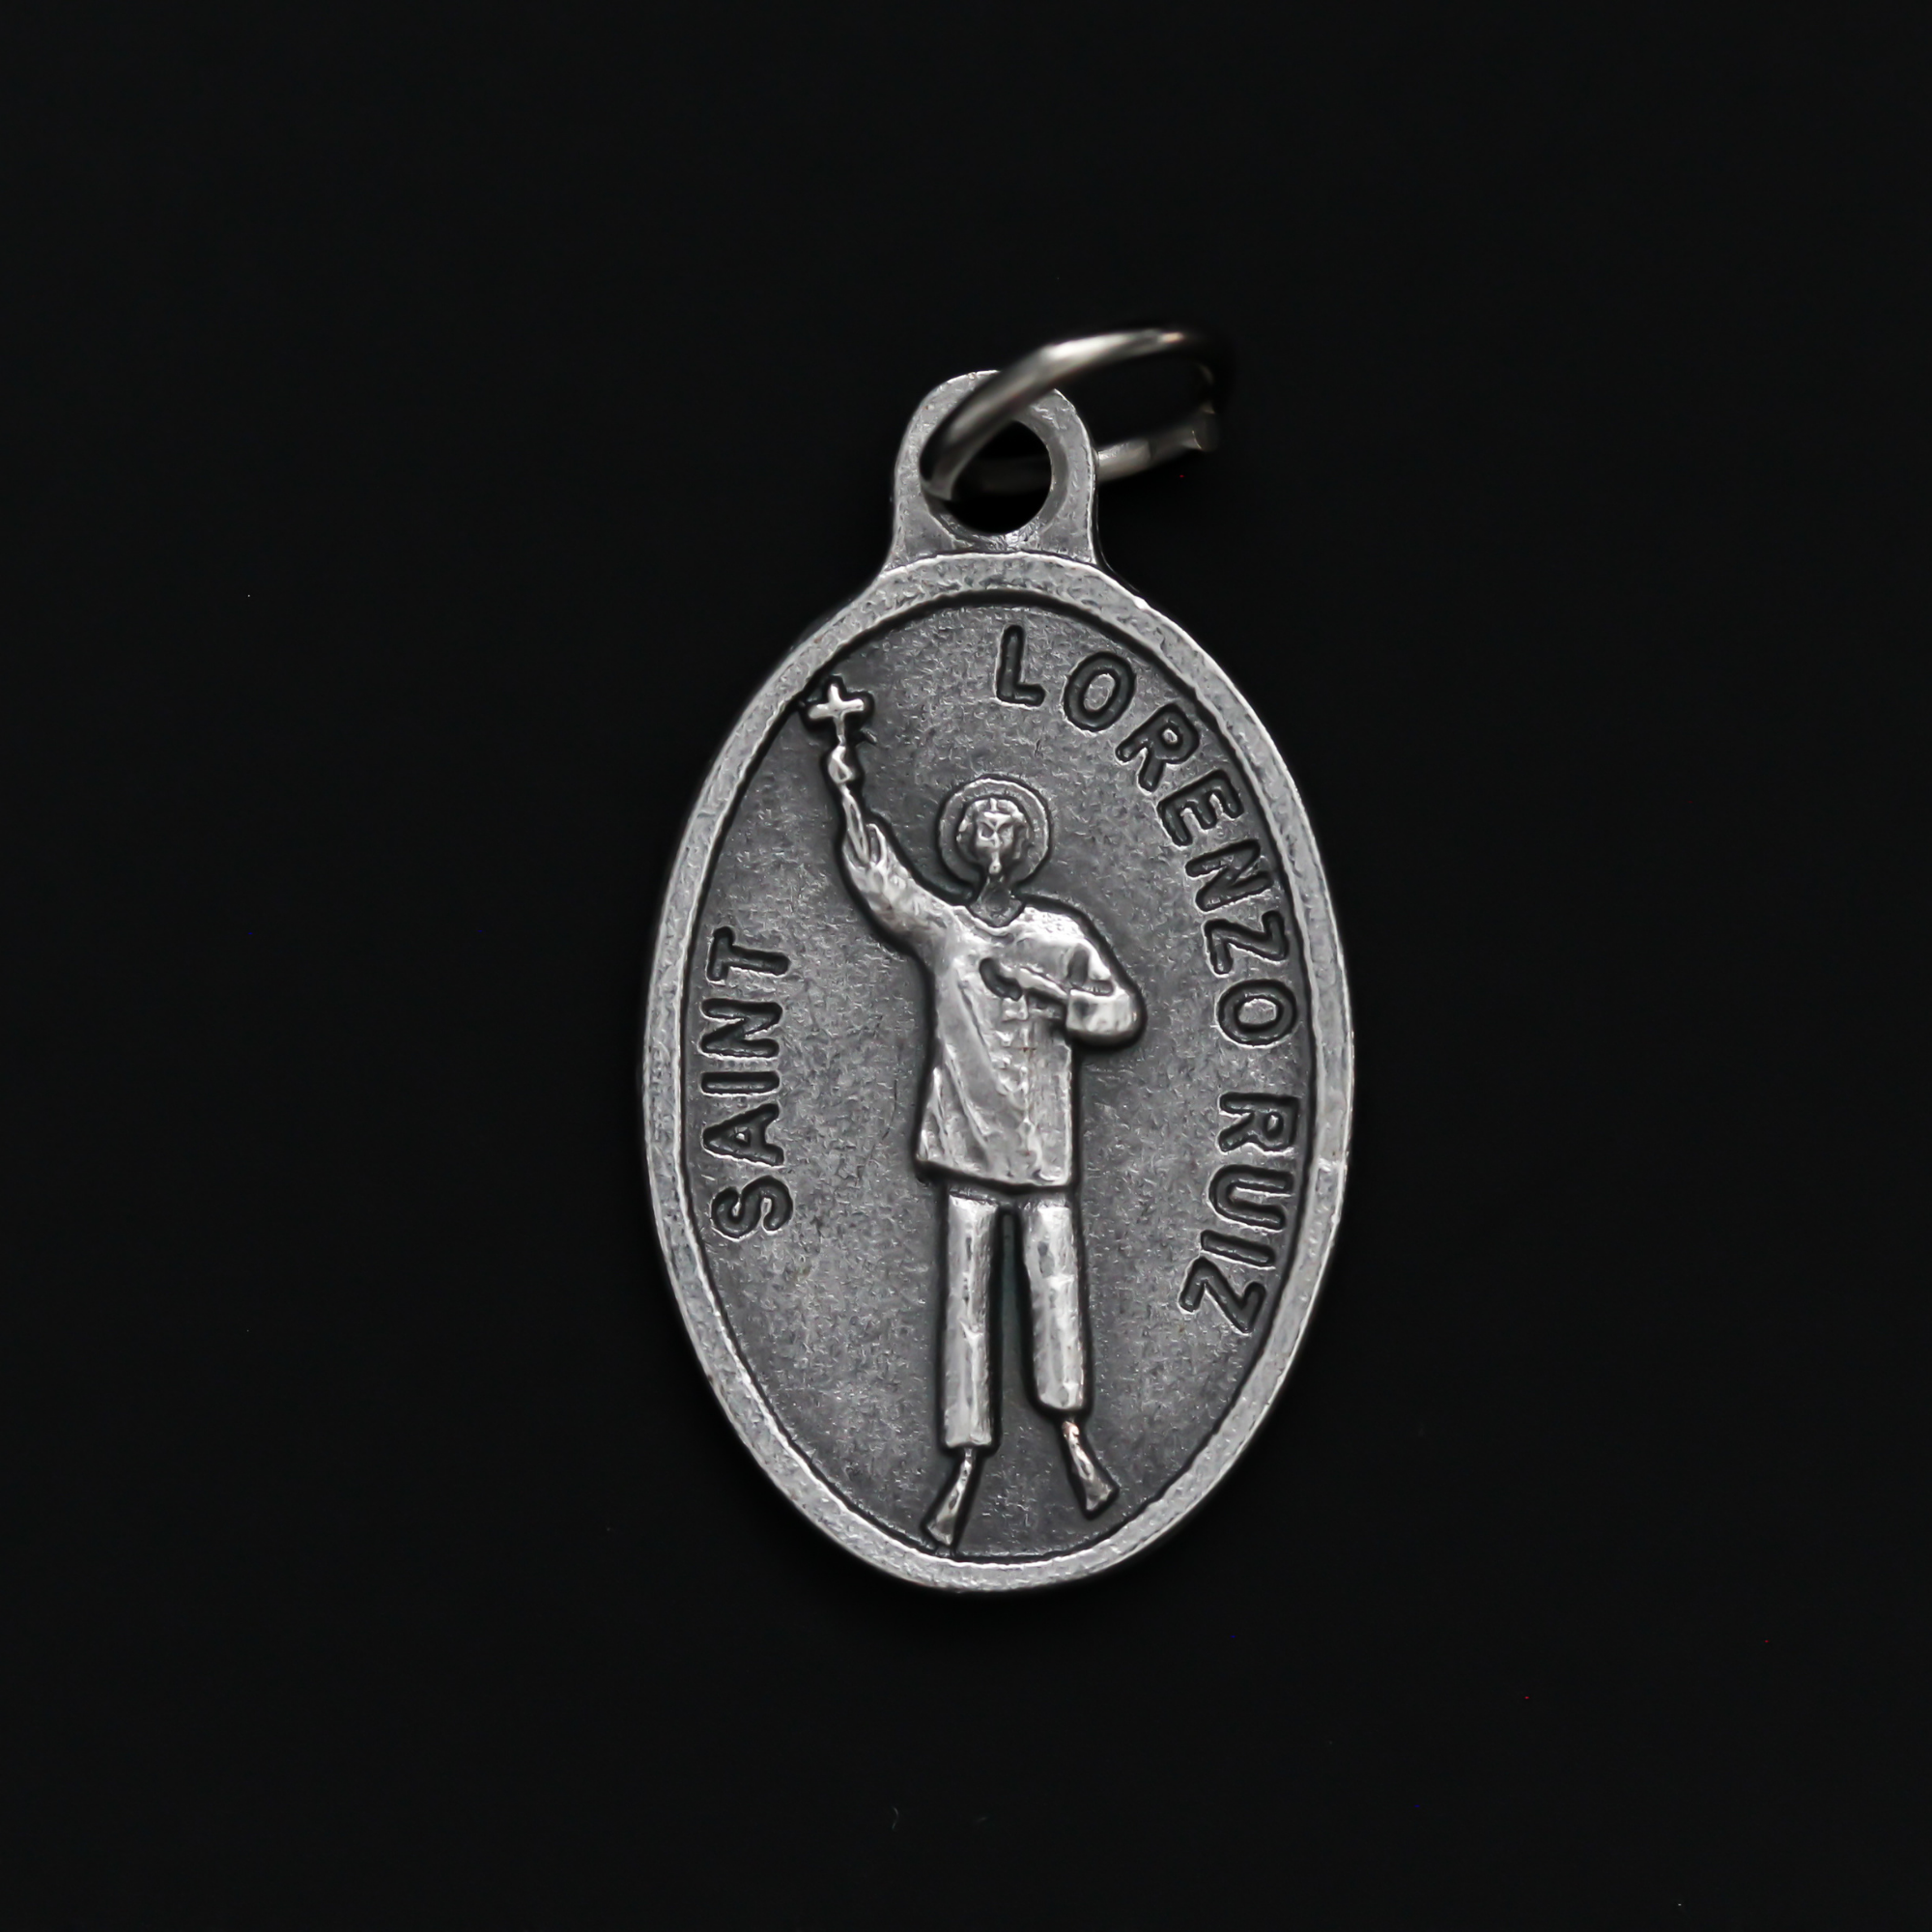 Saint Lorenzo Ruiz medal that depicts the saint on the front and is marked "Pray For Us" on the back